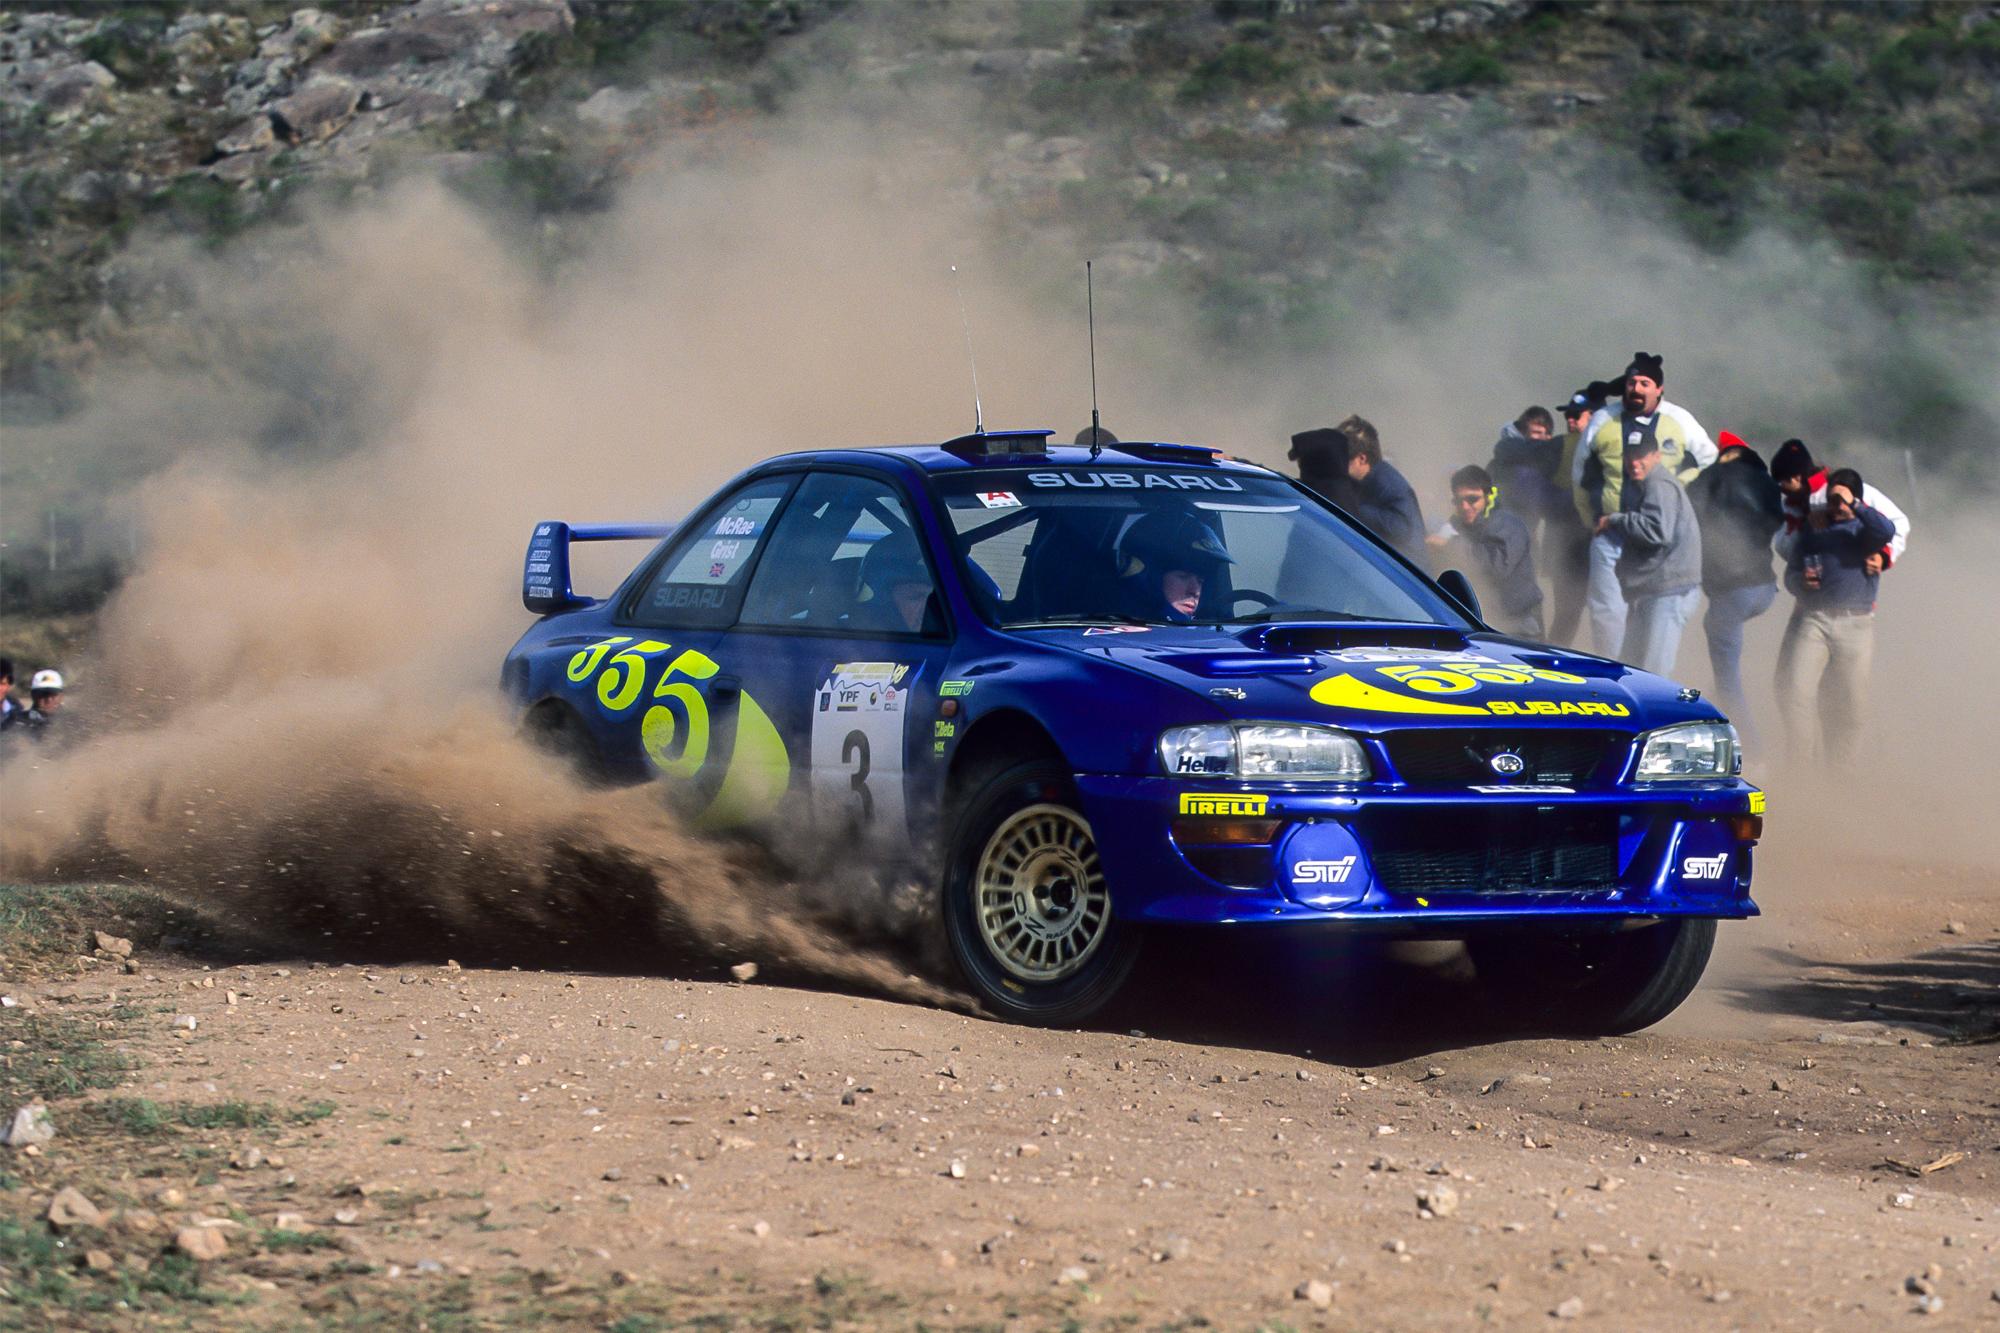 Flat out, η ζωή του Colin McRae